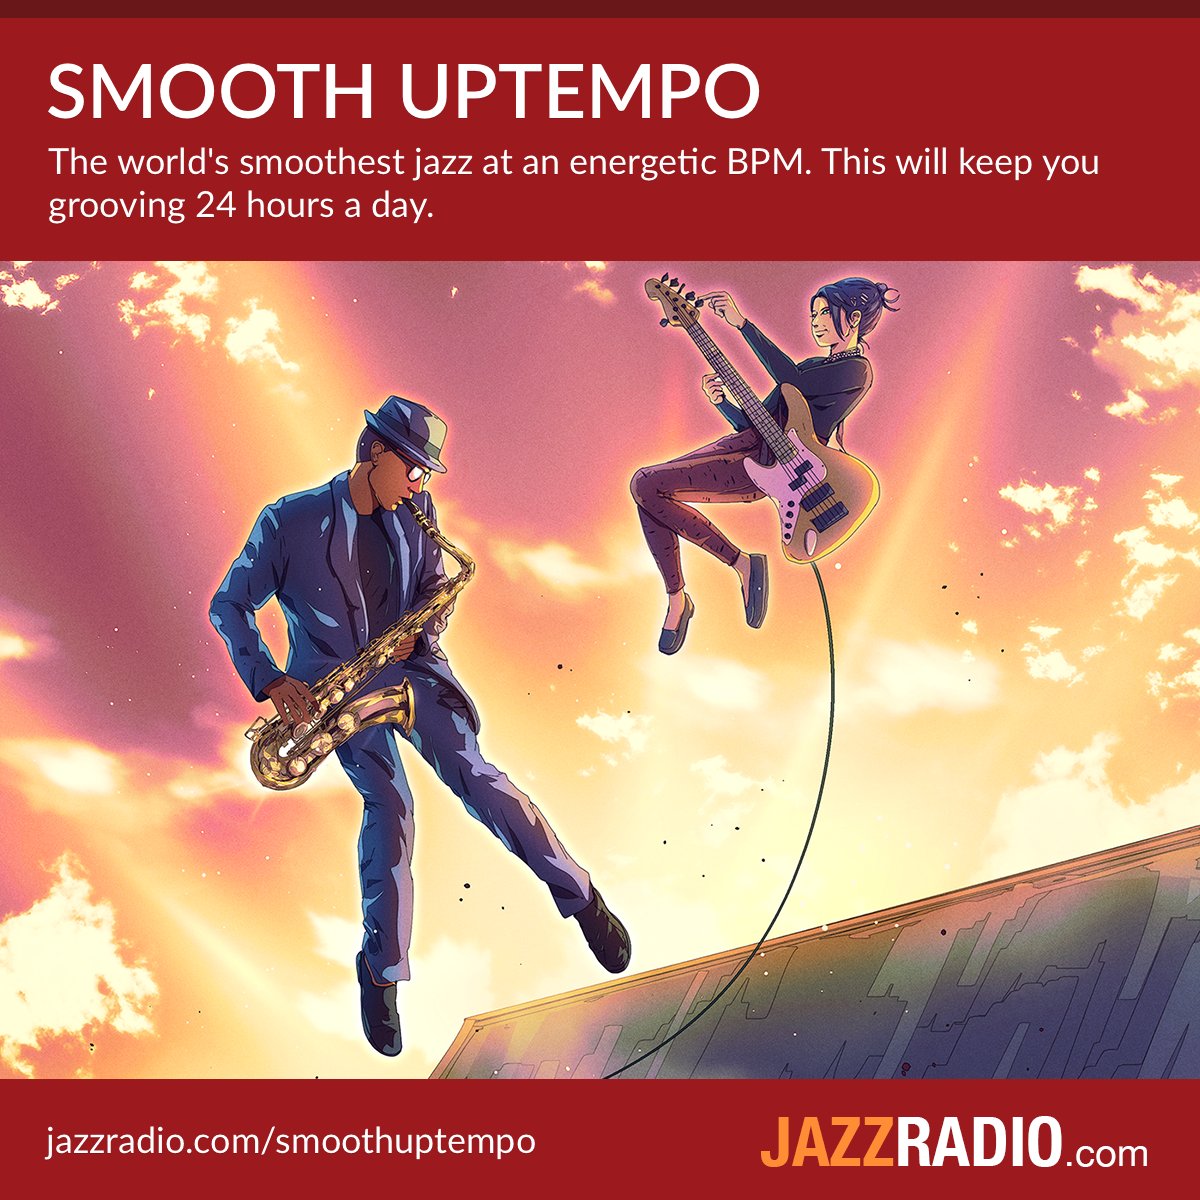 #SmoothUptempo – get into that fabulous #FridayFeeling with a dose of Smooth Uptempo vibes! Let the energetic & smooth rhythms groove your way through the weekend:
JAZZRADIO.com/smoothuptempo

•

#SmoothJazz #SmoothUptempoJazz #WeekendVibes #InternetRadio #JazzMusic #JazzRadio #Jazz